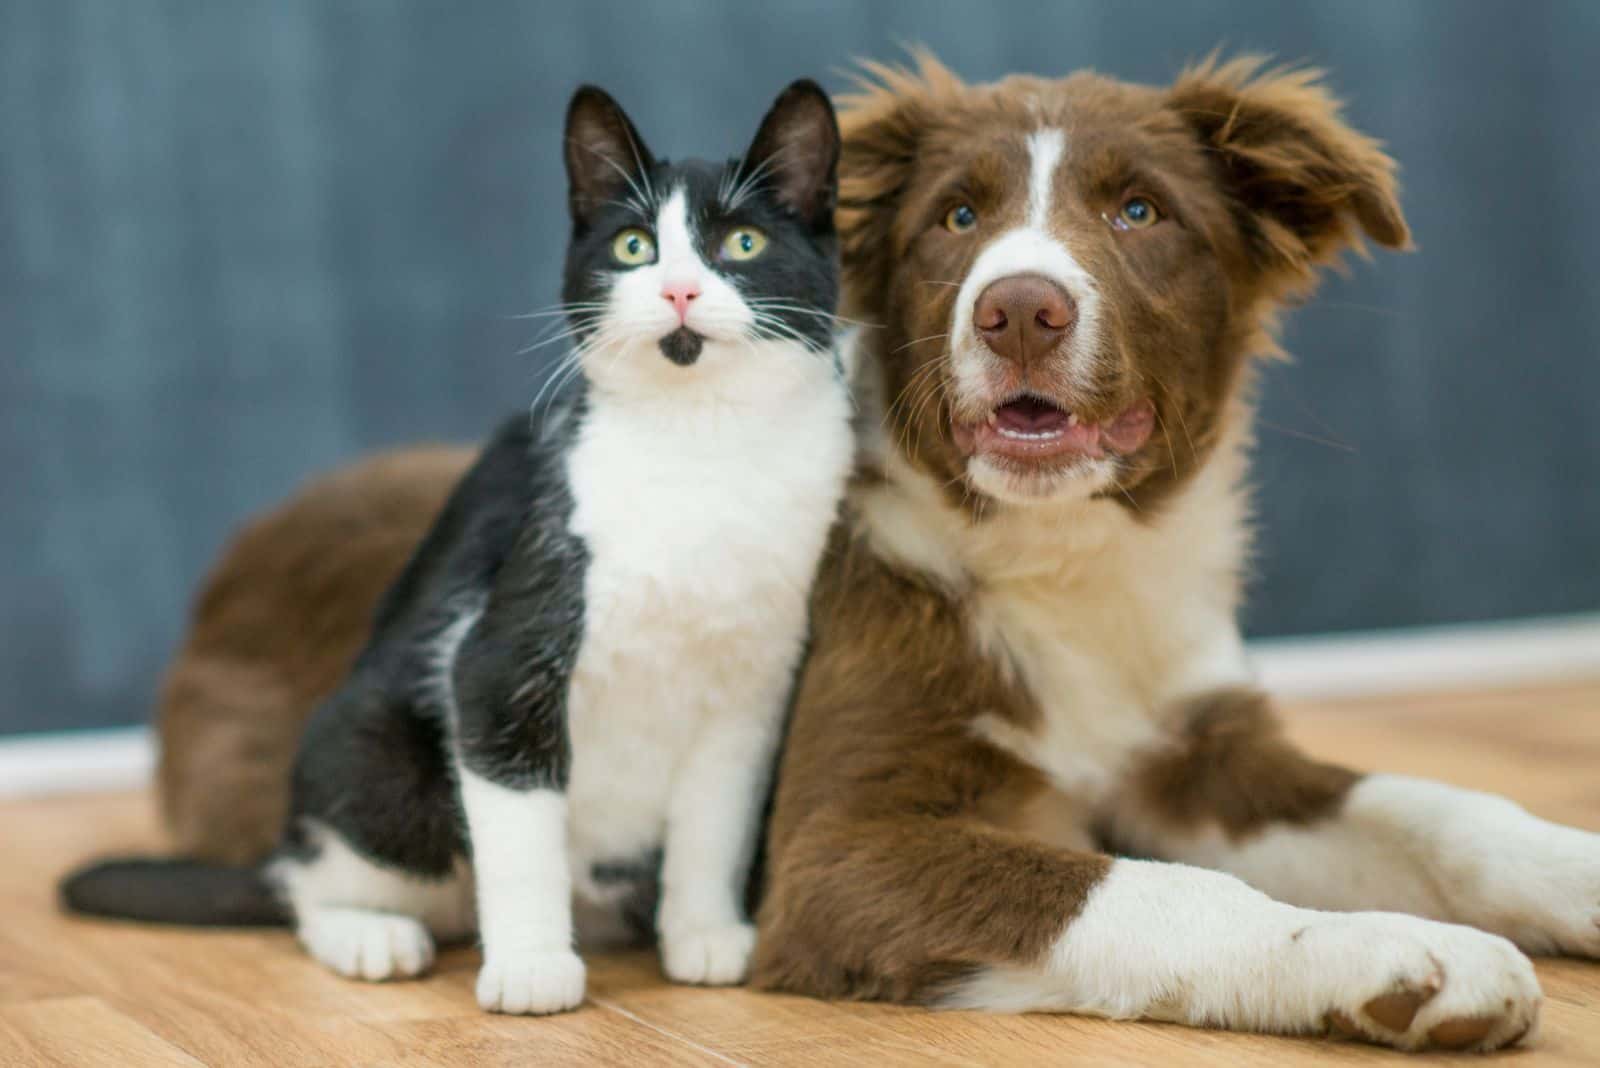 cat and a dog